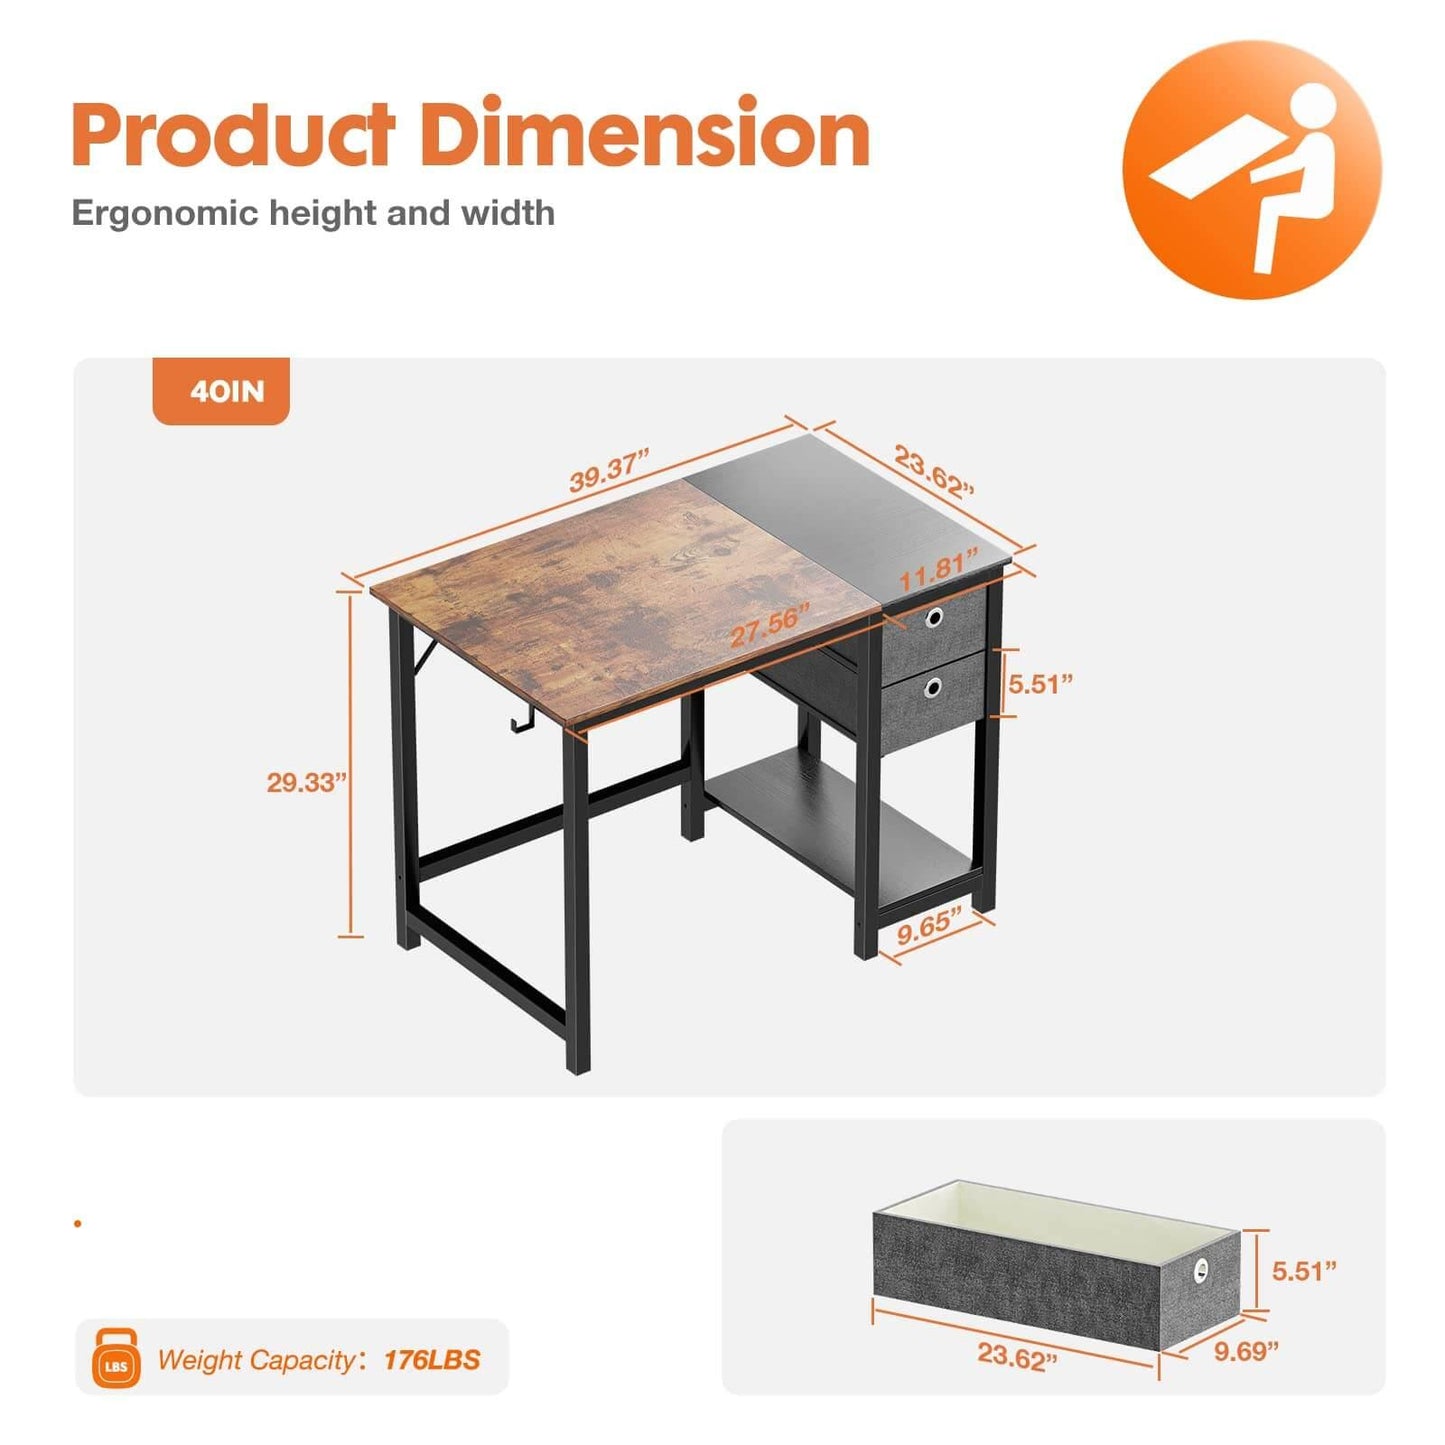 Compact Office Desk with Drawers for Work or Study